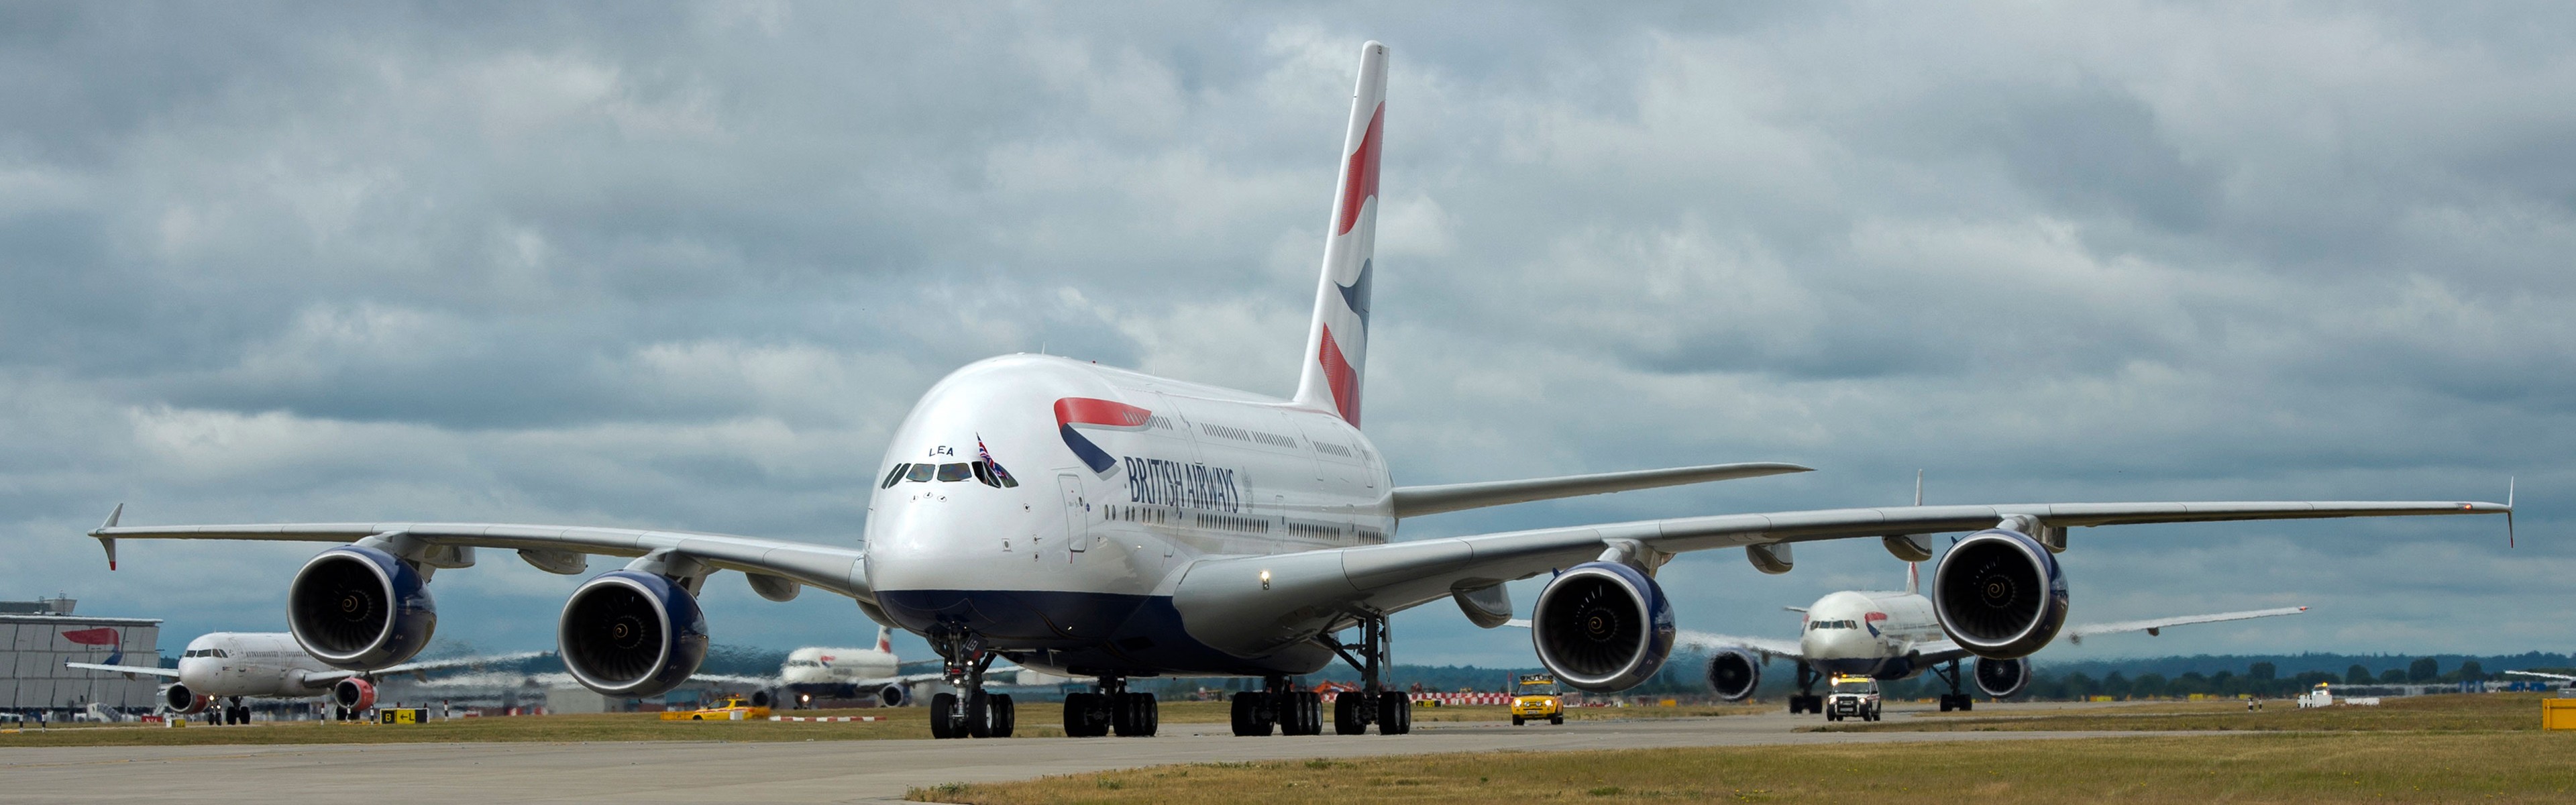 General 3840x1200 Airbus A380 Airbus airplane aircraft airport dual monitors multiple display passenger aircraft vehicle airline british airways french aircraft